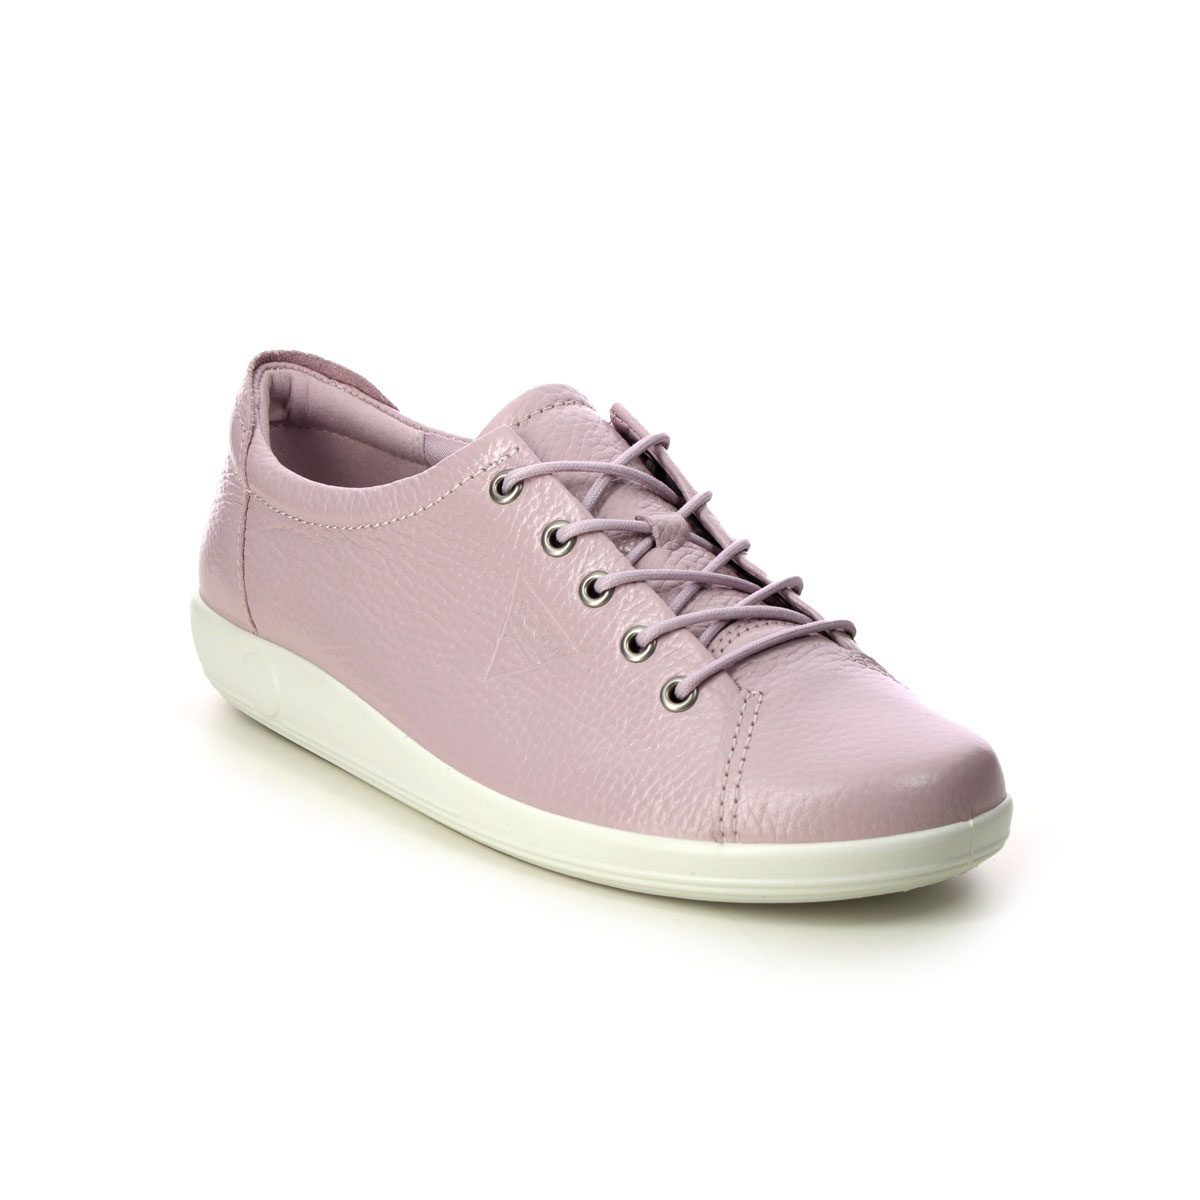 ECCO Soft 2.0 Violet Womens lacing shoes 206503-01405 in a Plain Leather in Size 38